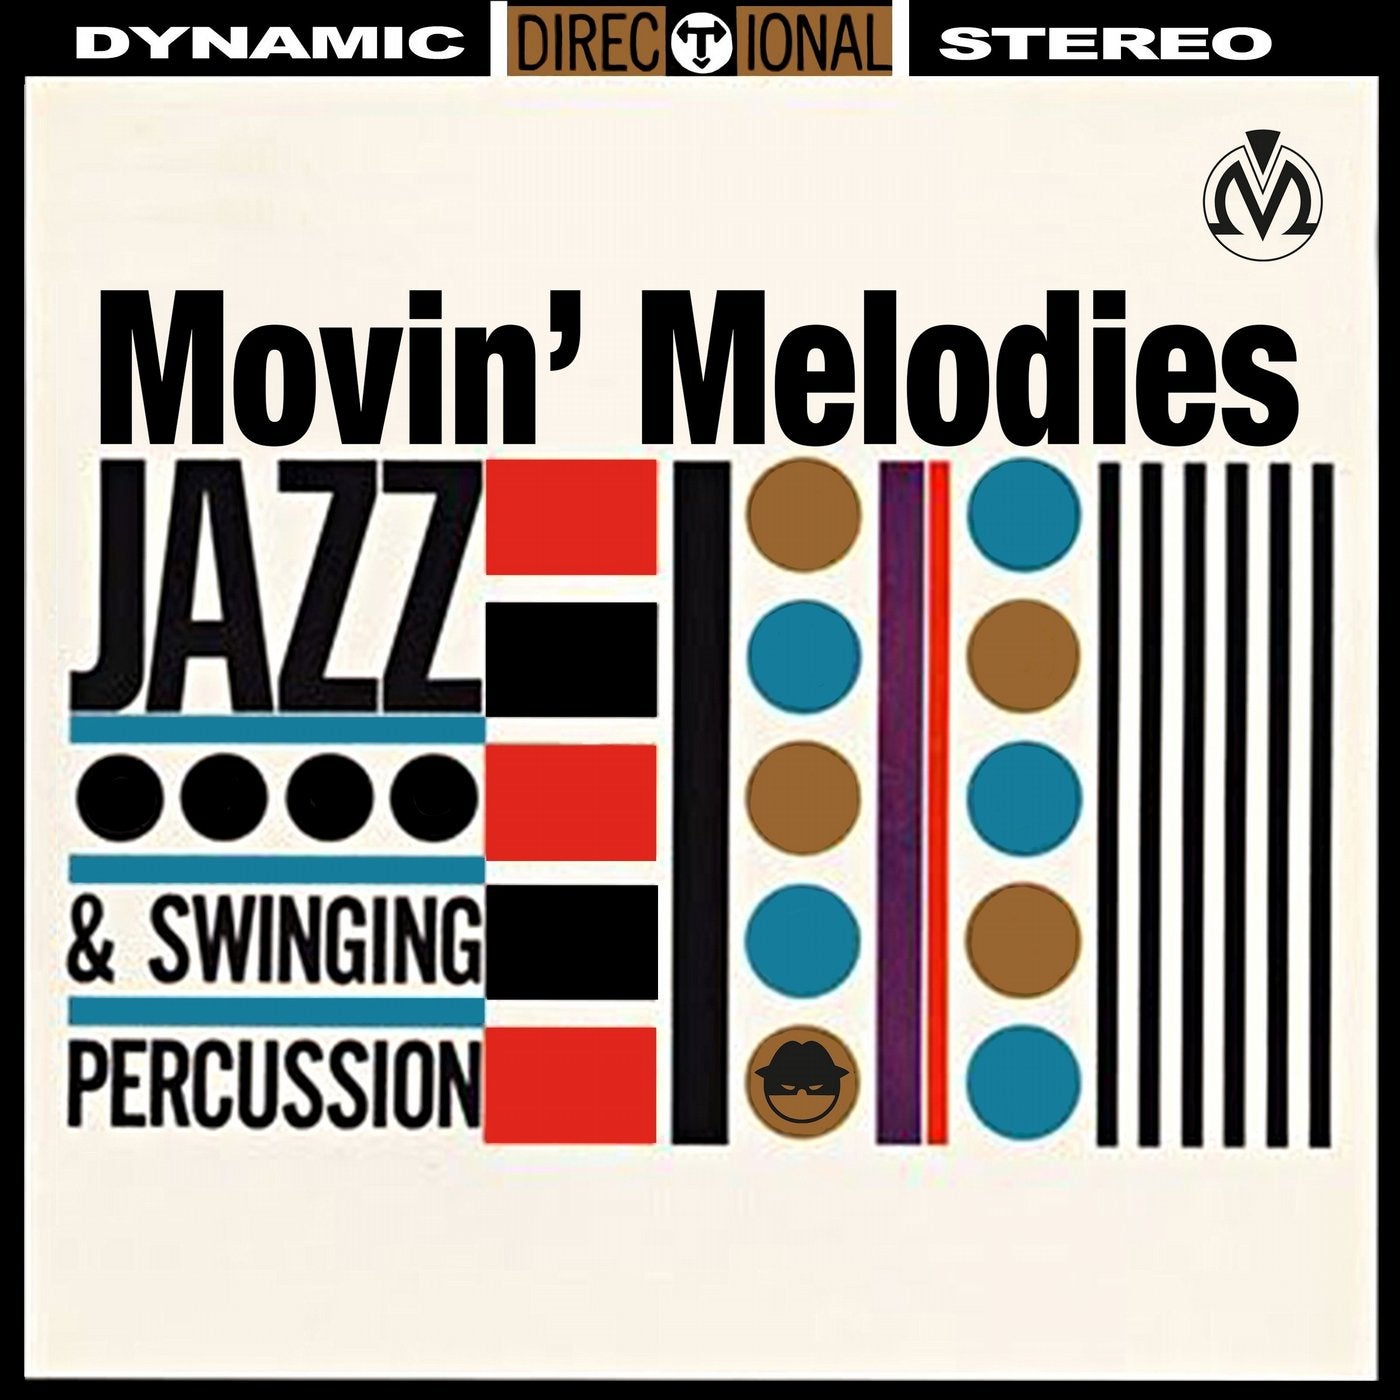 Movin' Melodies Jazz & Swinging Percussion